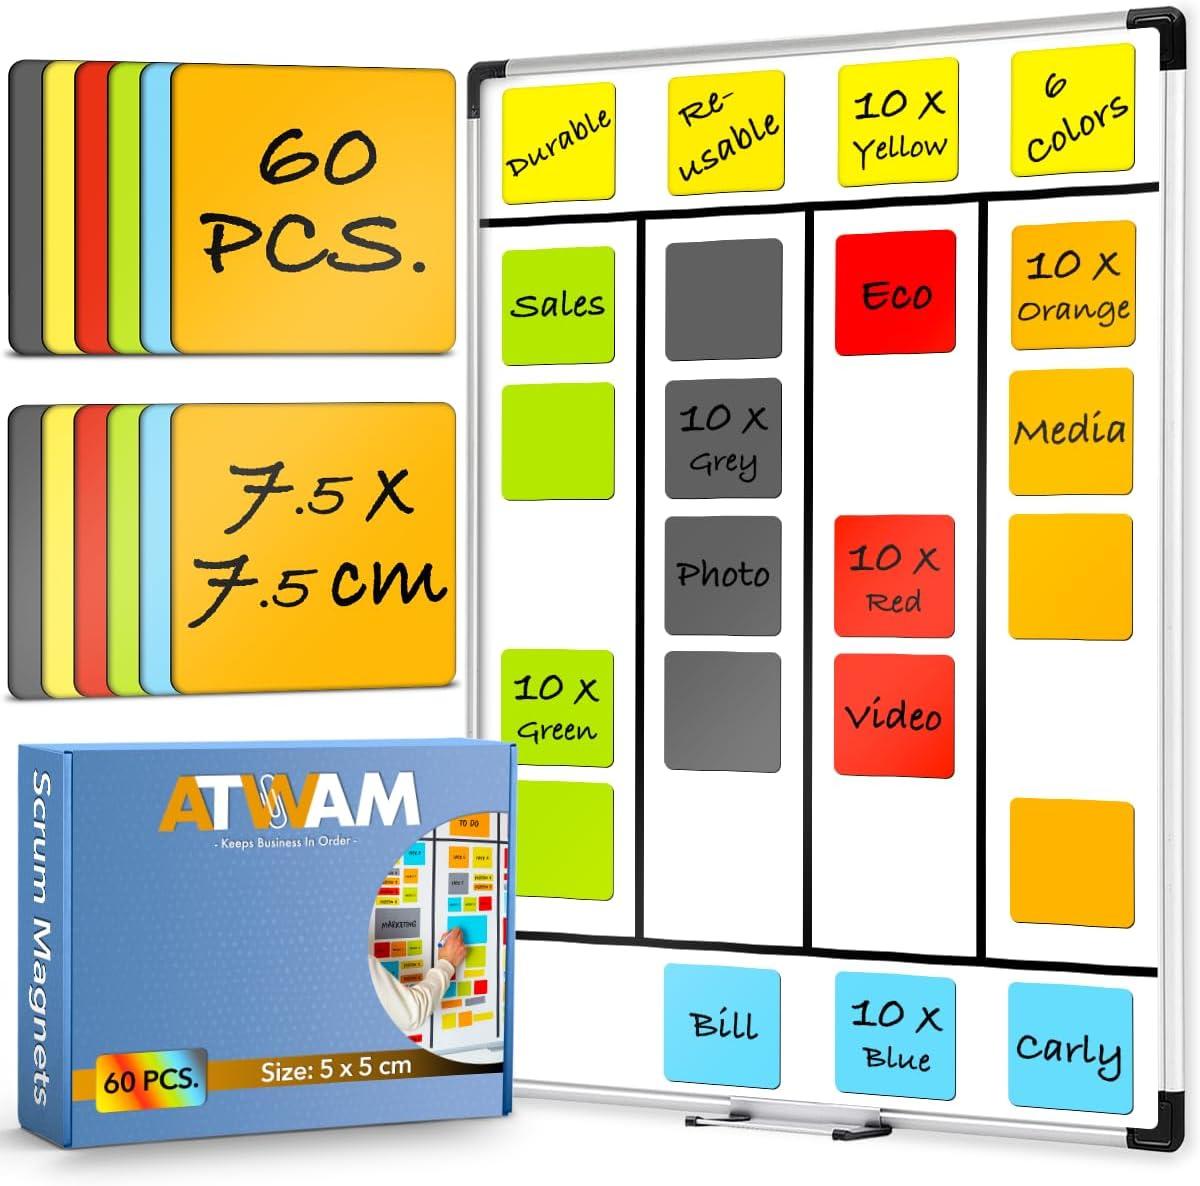 atwam - scrum whiteboard magnets - pack of 60 - magnetic memo sheets - kanban - 7 5 x 7 5 cm - 6 colours 